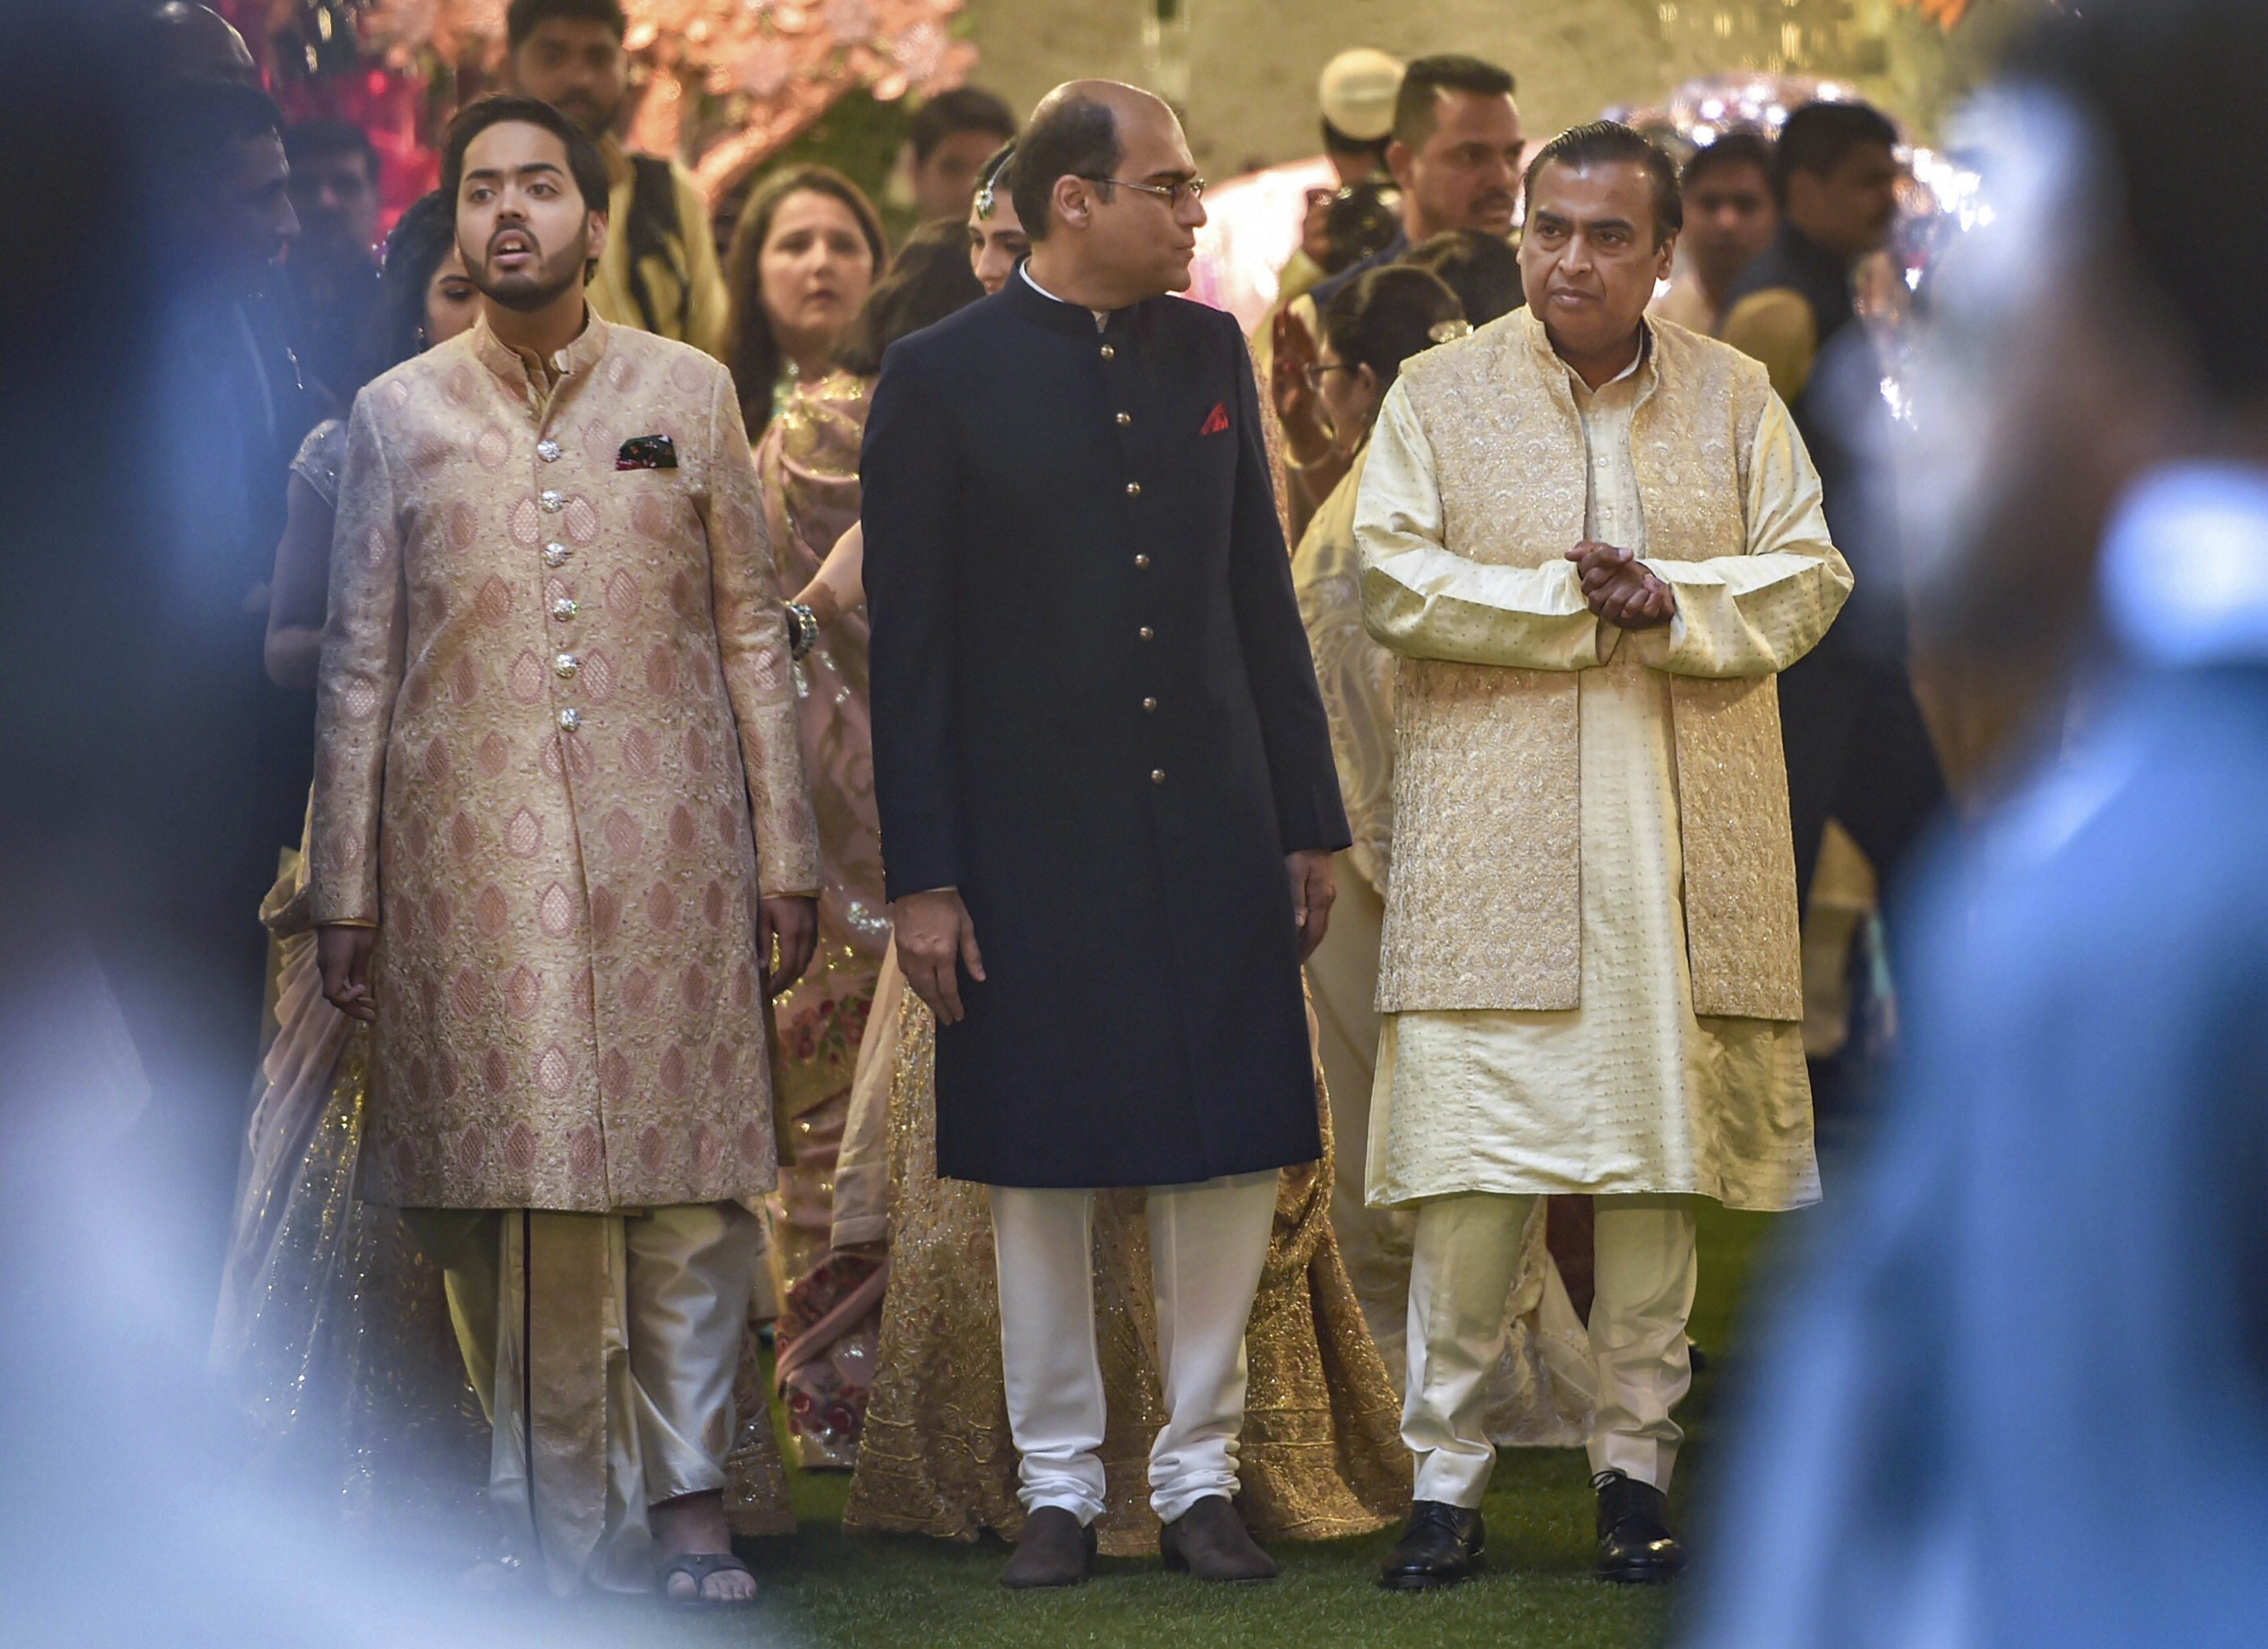 Industrialist Mukesh Ambani with son Anant waits for the arrival of the groom, Anand Piramal, at their residence, Antilla, on the wedding day, in Mumbai - PTI